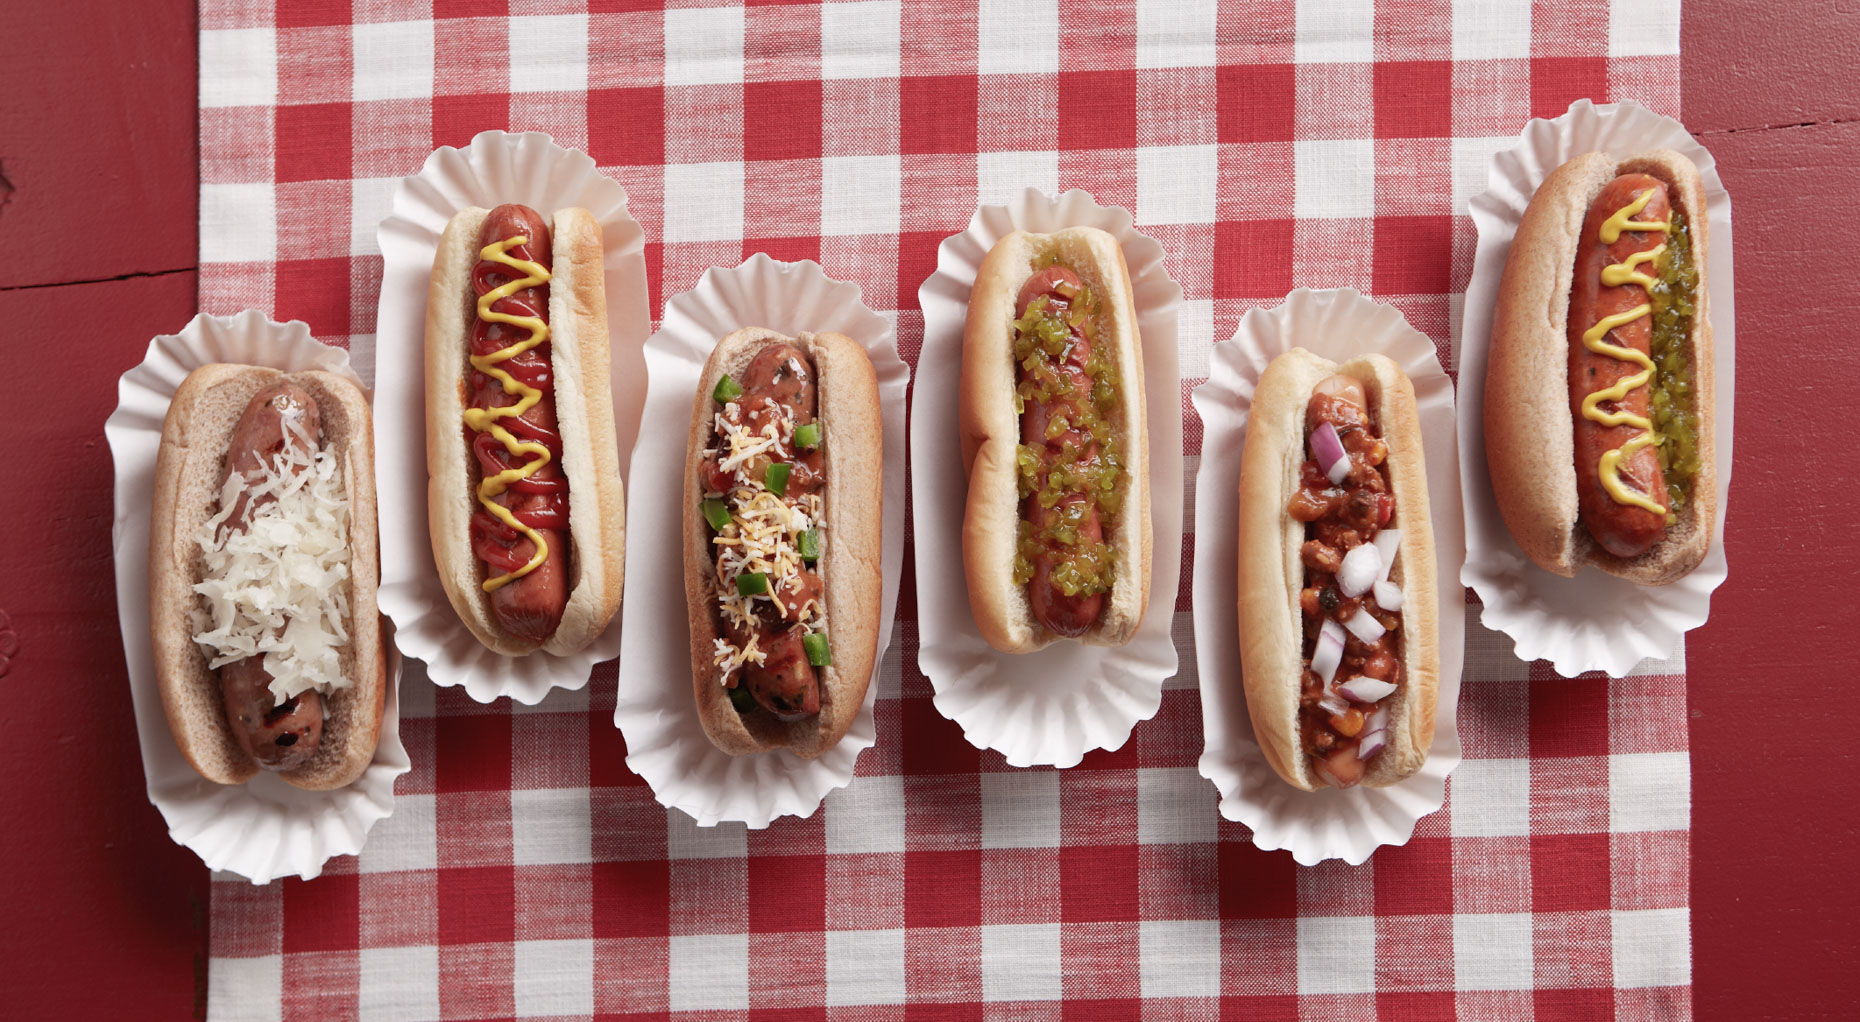 array of hotdogs with different toppings on red plaid tablecloth San Francisco food photographer